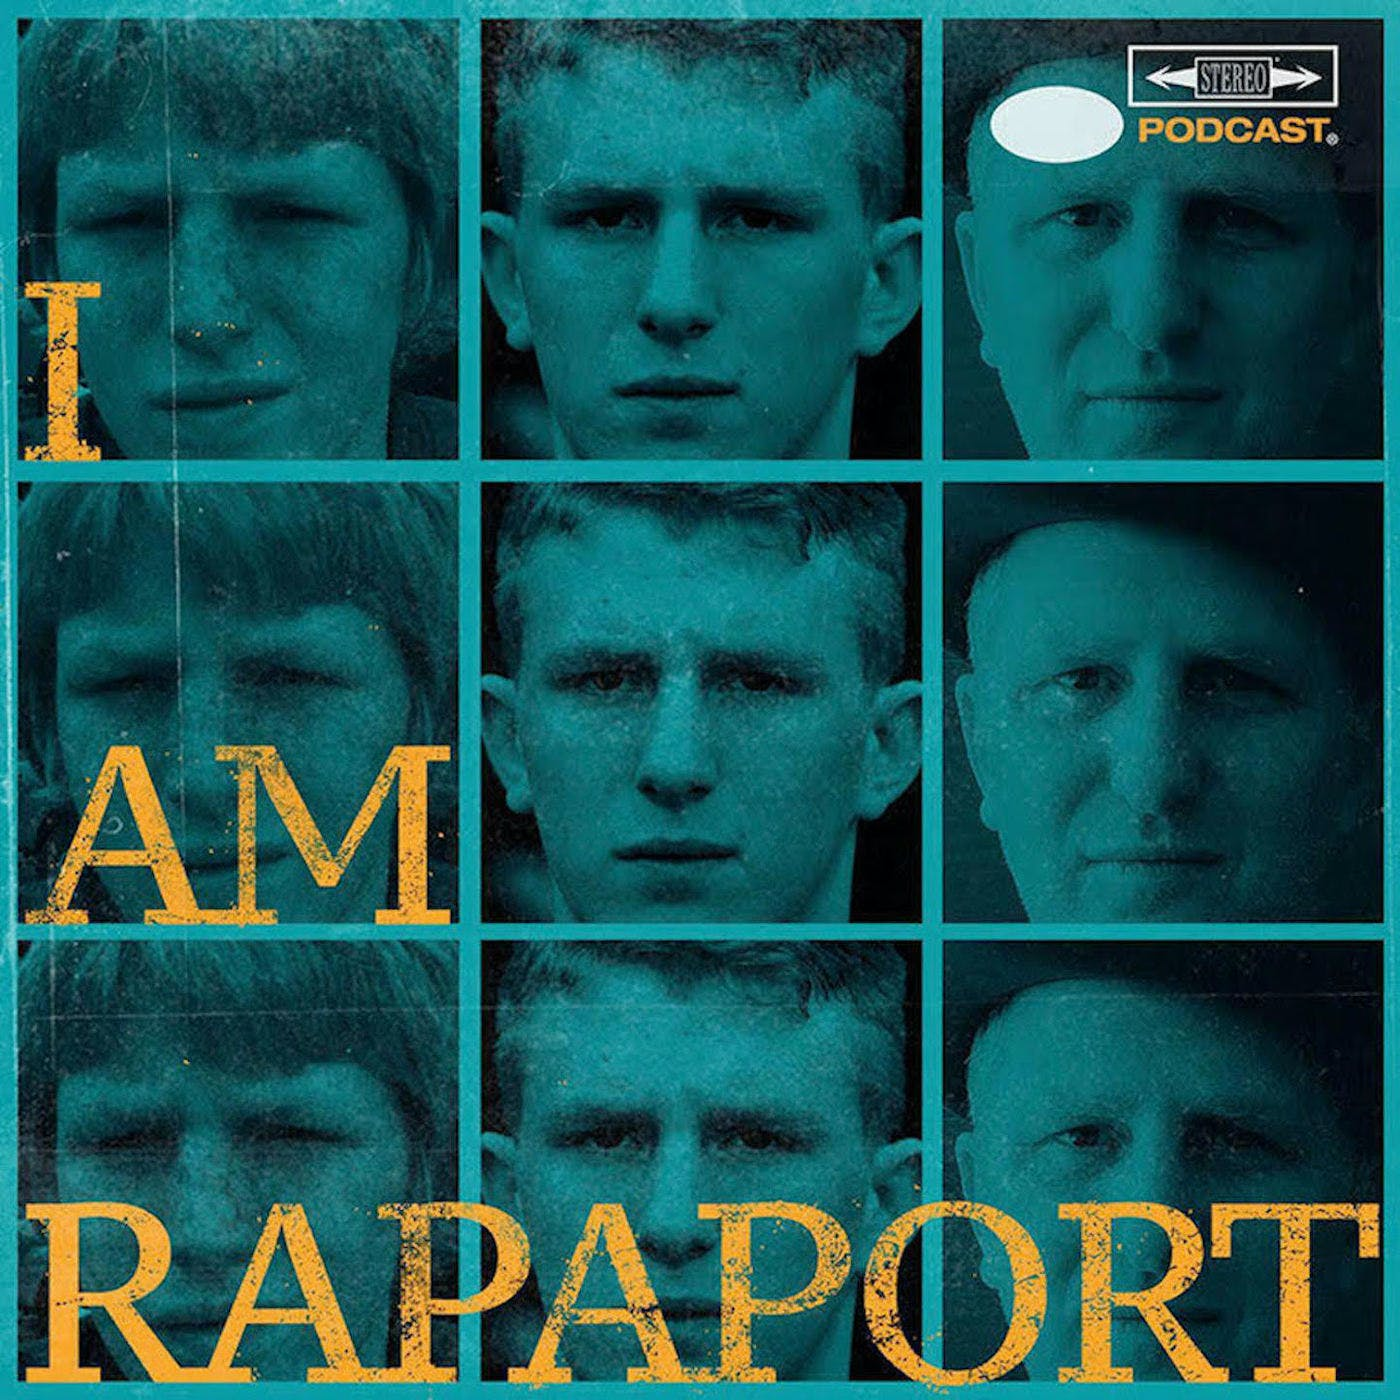 EP 207 - FANTASY FOOTBALL FOLLIES 4  - BROUGHT TO YOU BY DRAFTKINGS: www.DRAFTKINGS.com/iamrapaport